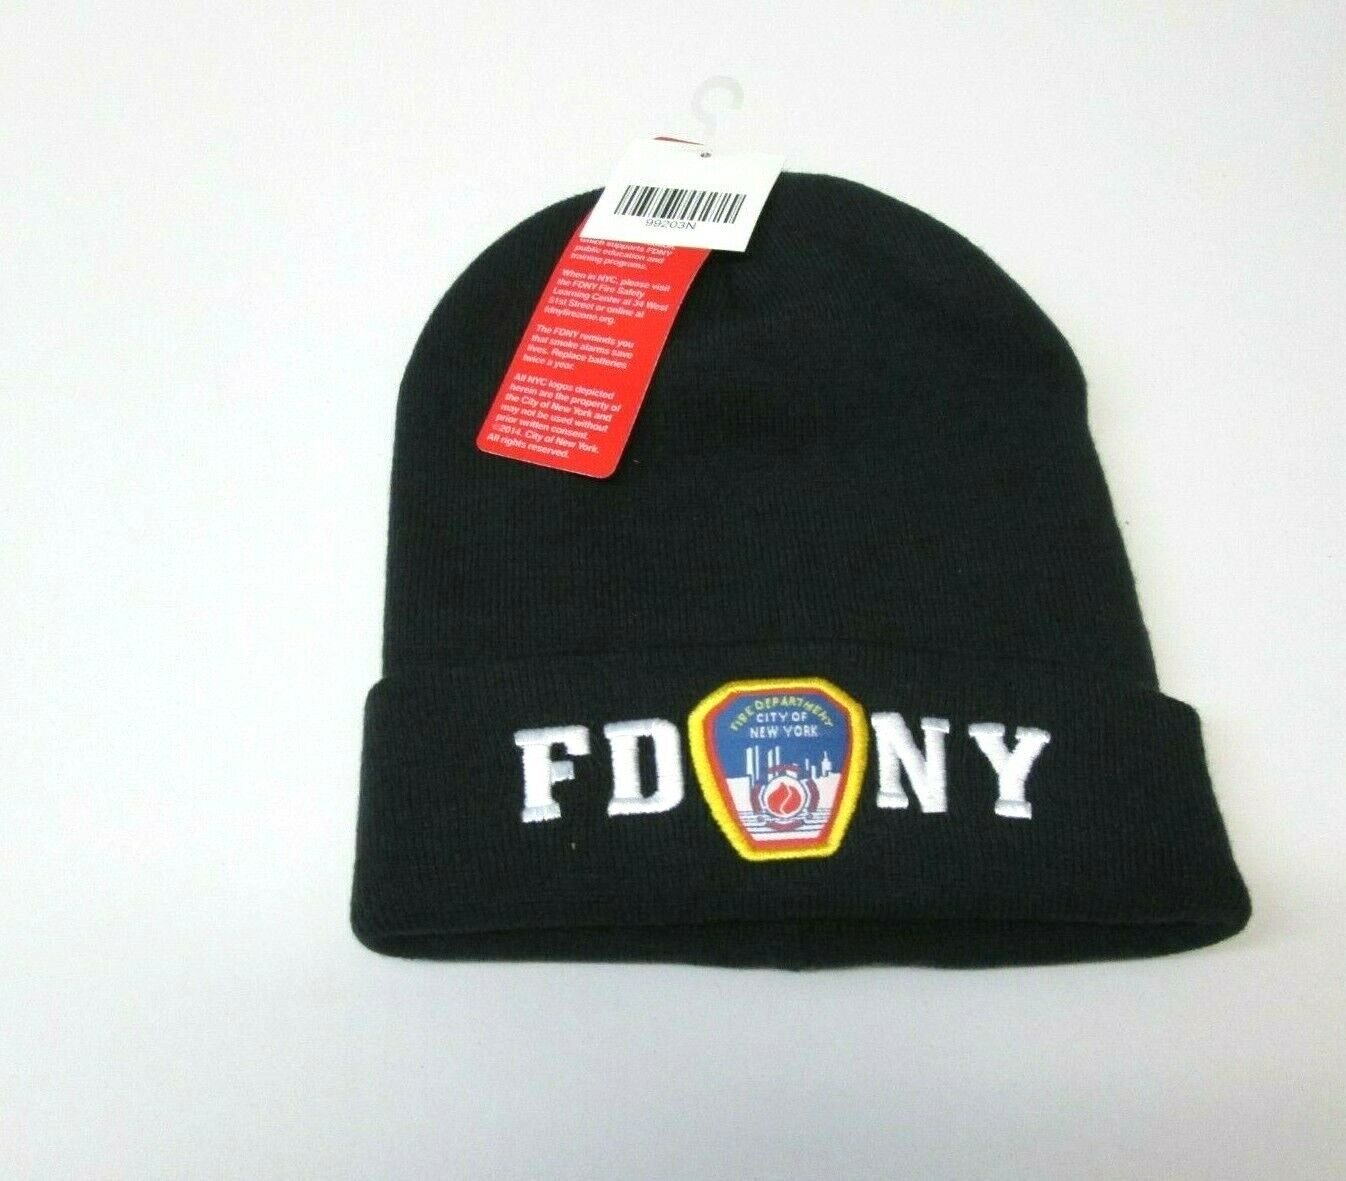 New Men's FDNY New Shipping Free Shipping Fire Cash special price Department City NY Knit Of Embroidered Beani